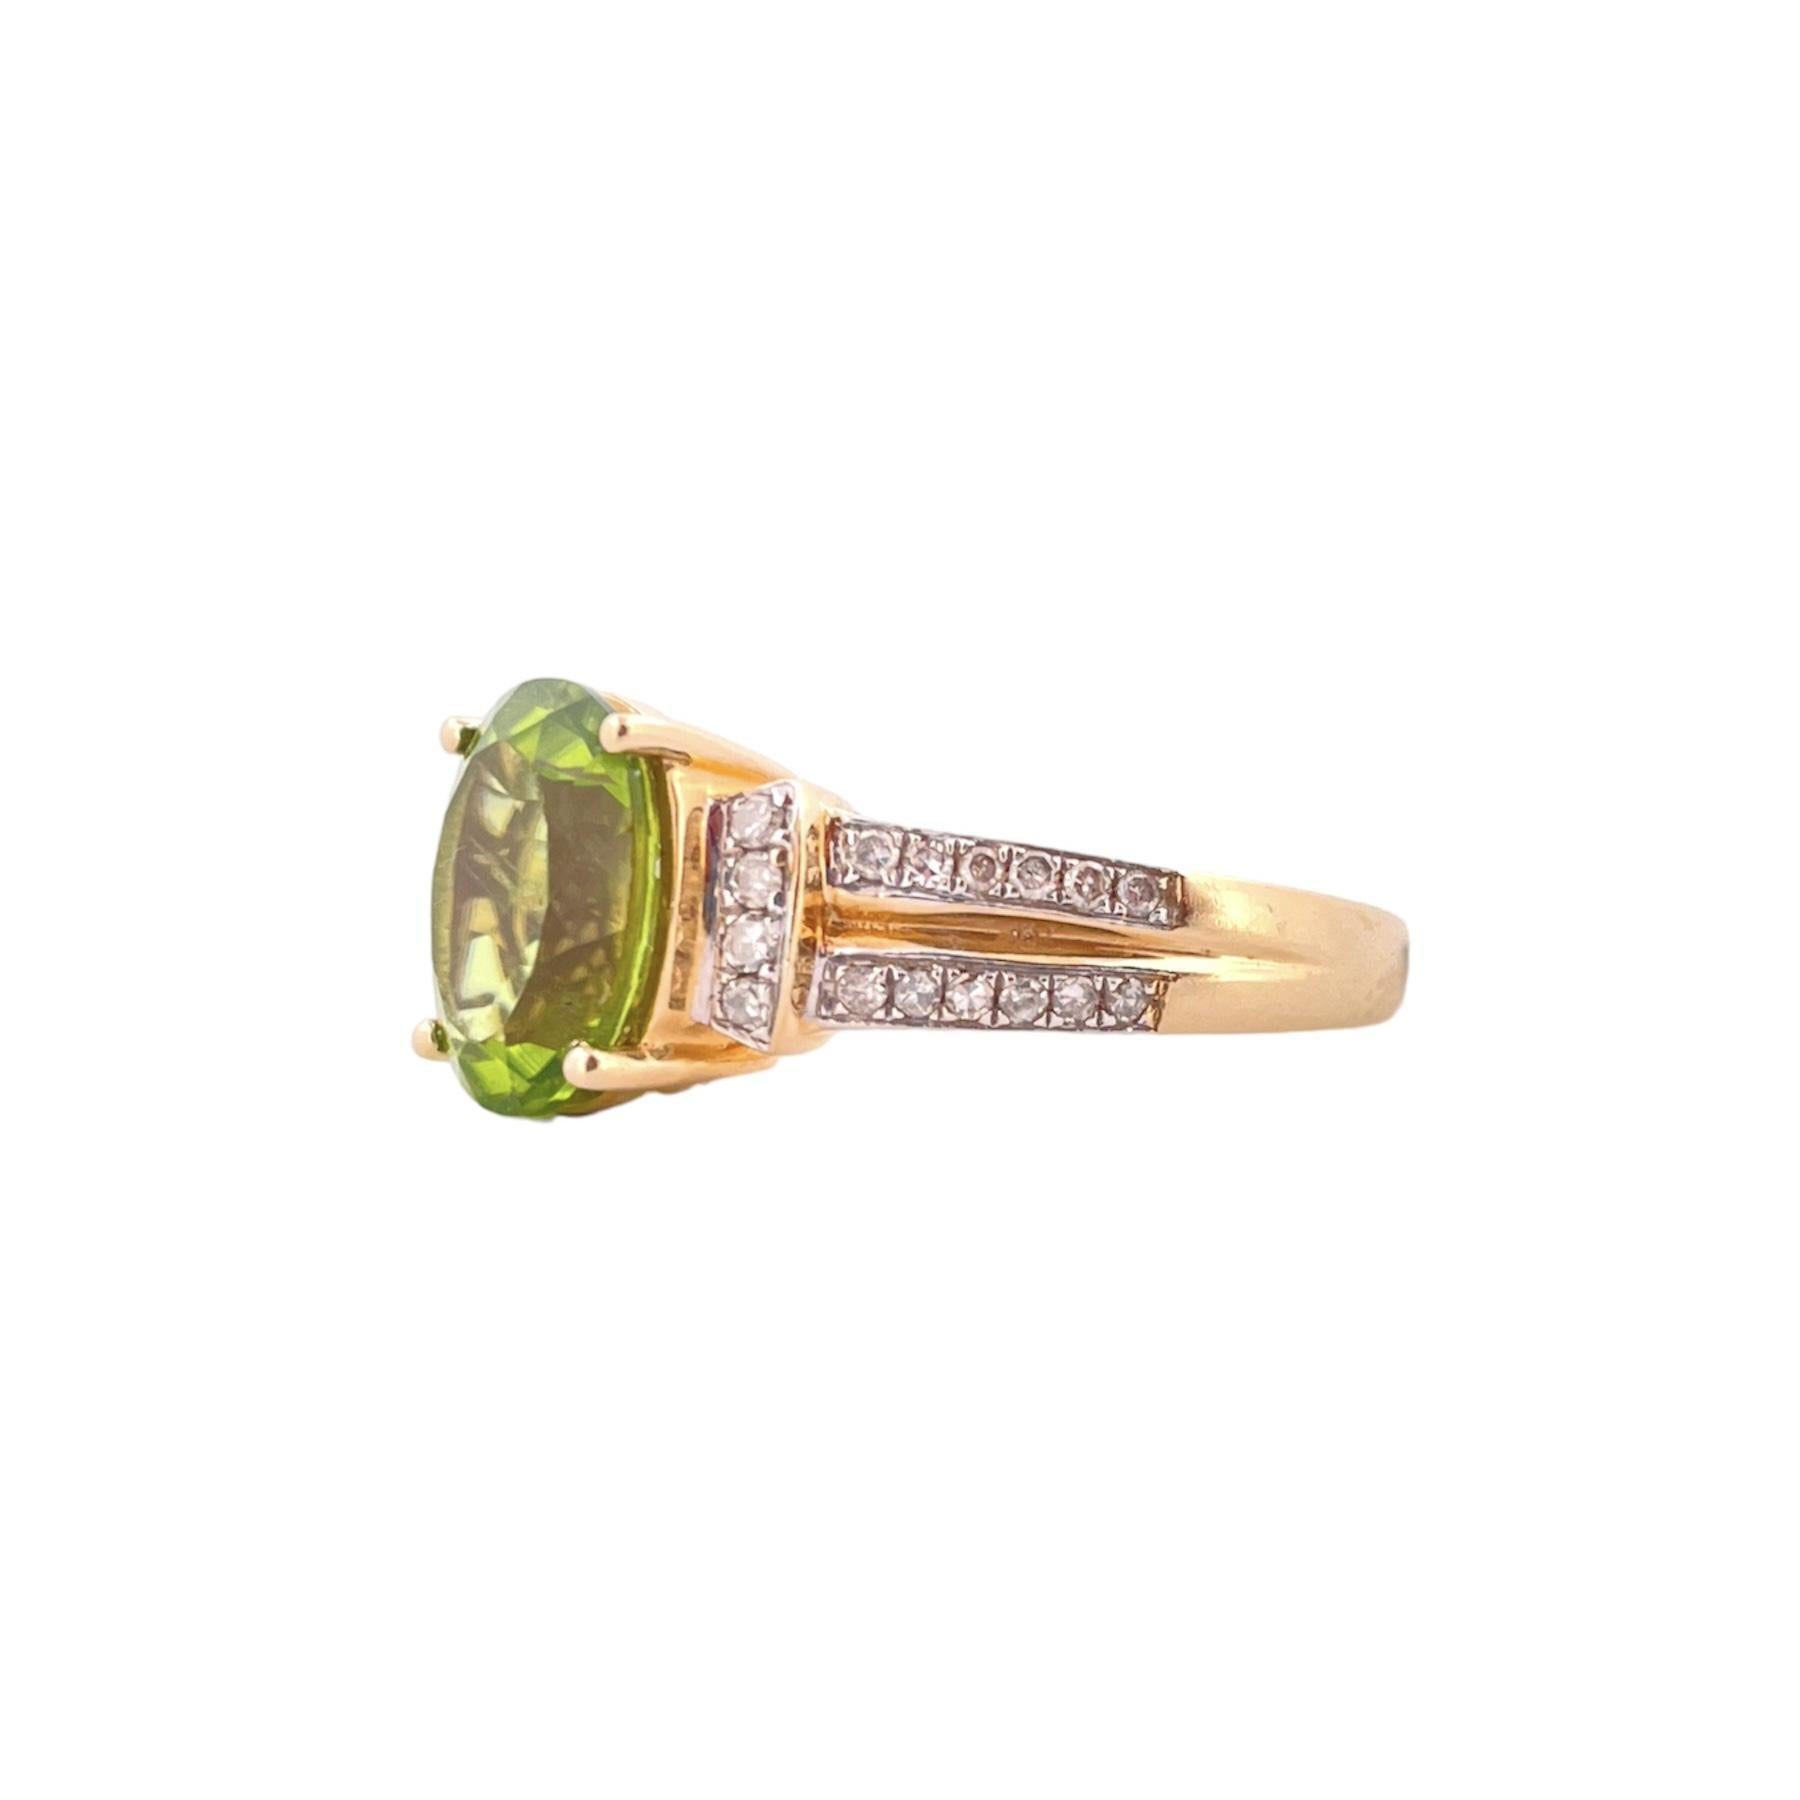 Oval Cut Oval Peridot Ring with Diamond Accents - 14K Yellow Gold For Sale